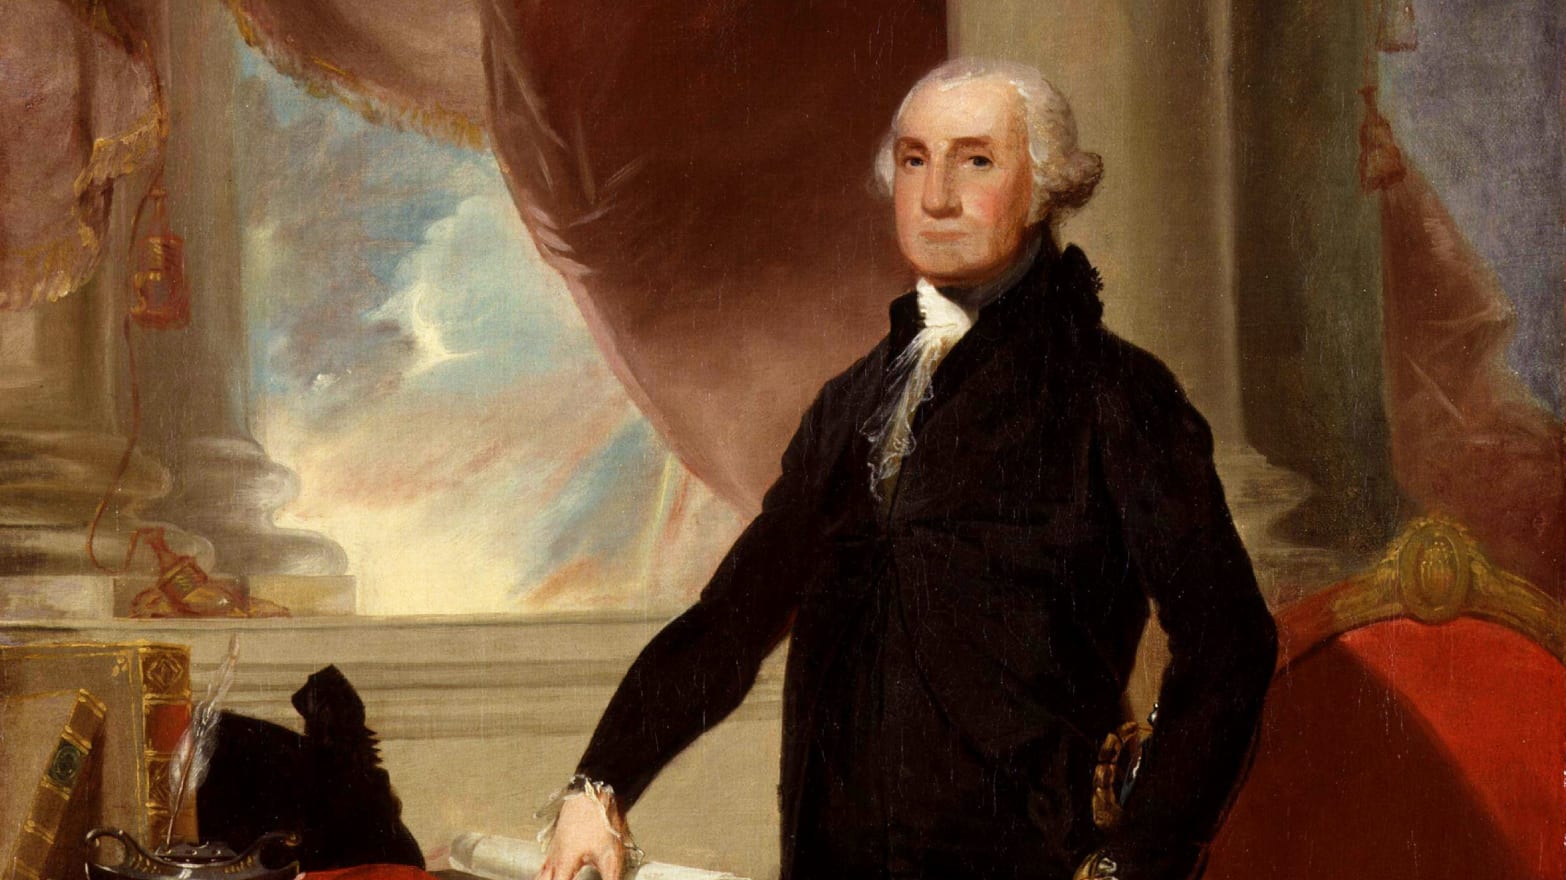 George Washington and the Story of the First Inaugural Address